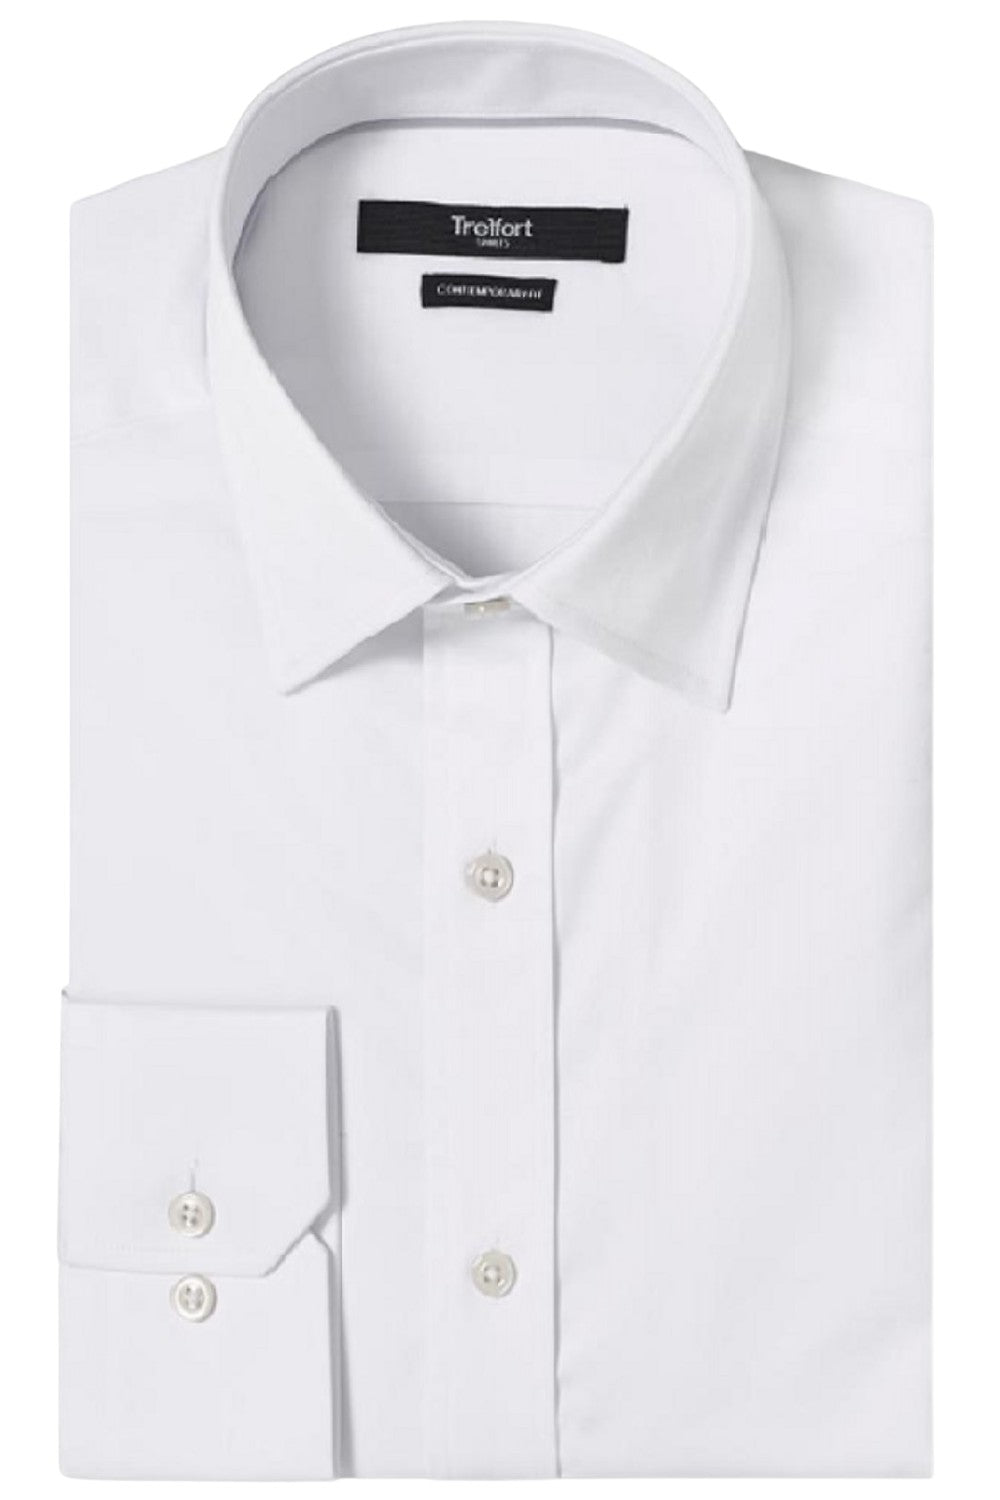 EVANS WHITE BUTTON DOWN DRESS SHIRT - CASUAL /FORMAL EVENT - FRONT VIEW